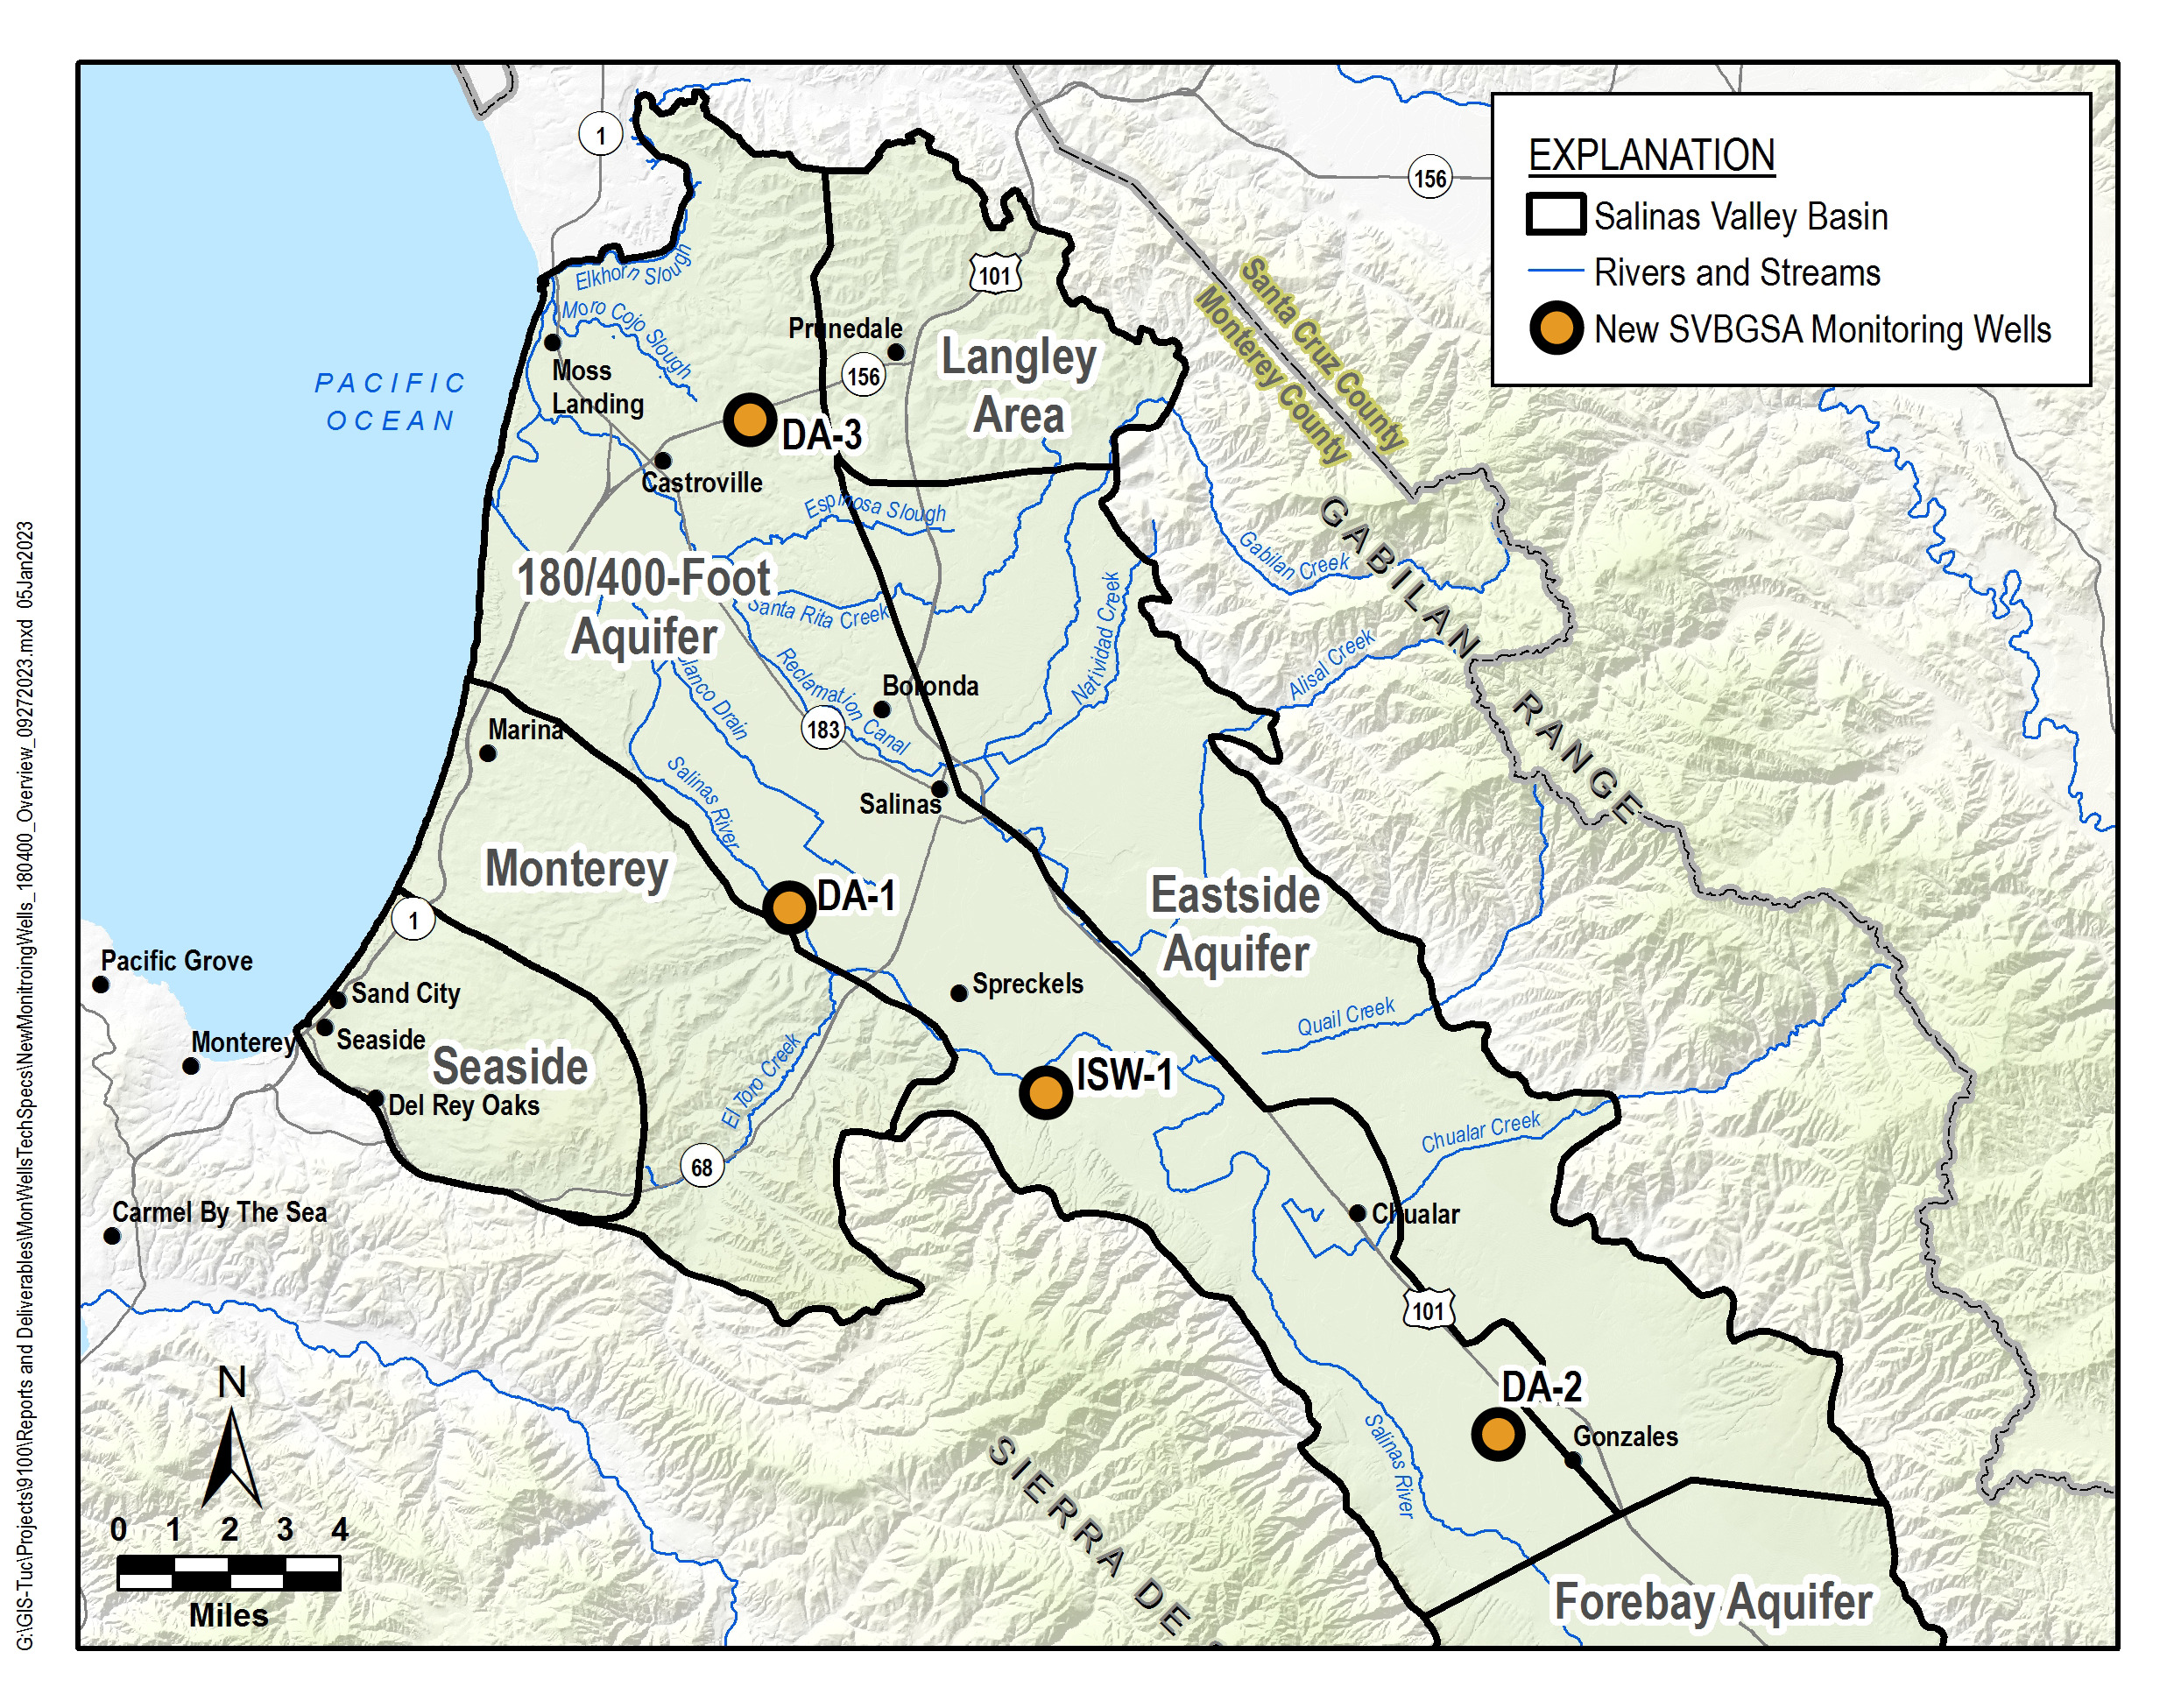 A map of the four monitoring wells in the Salinas Valley Groundwater Basin